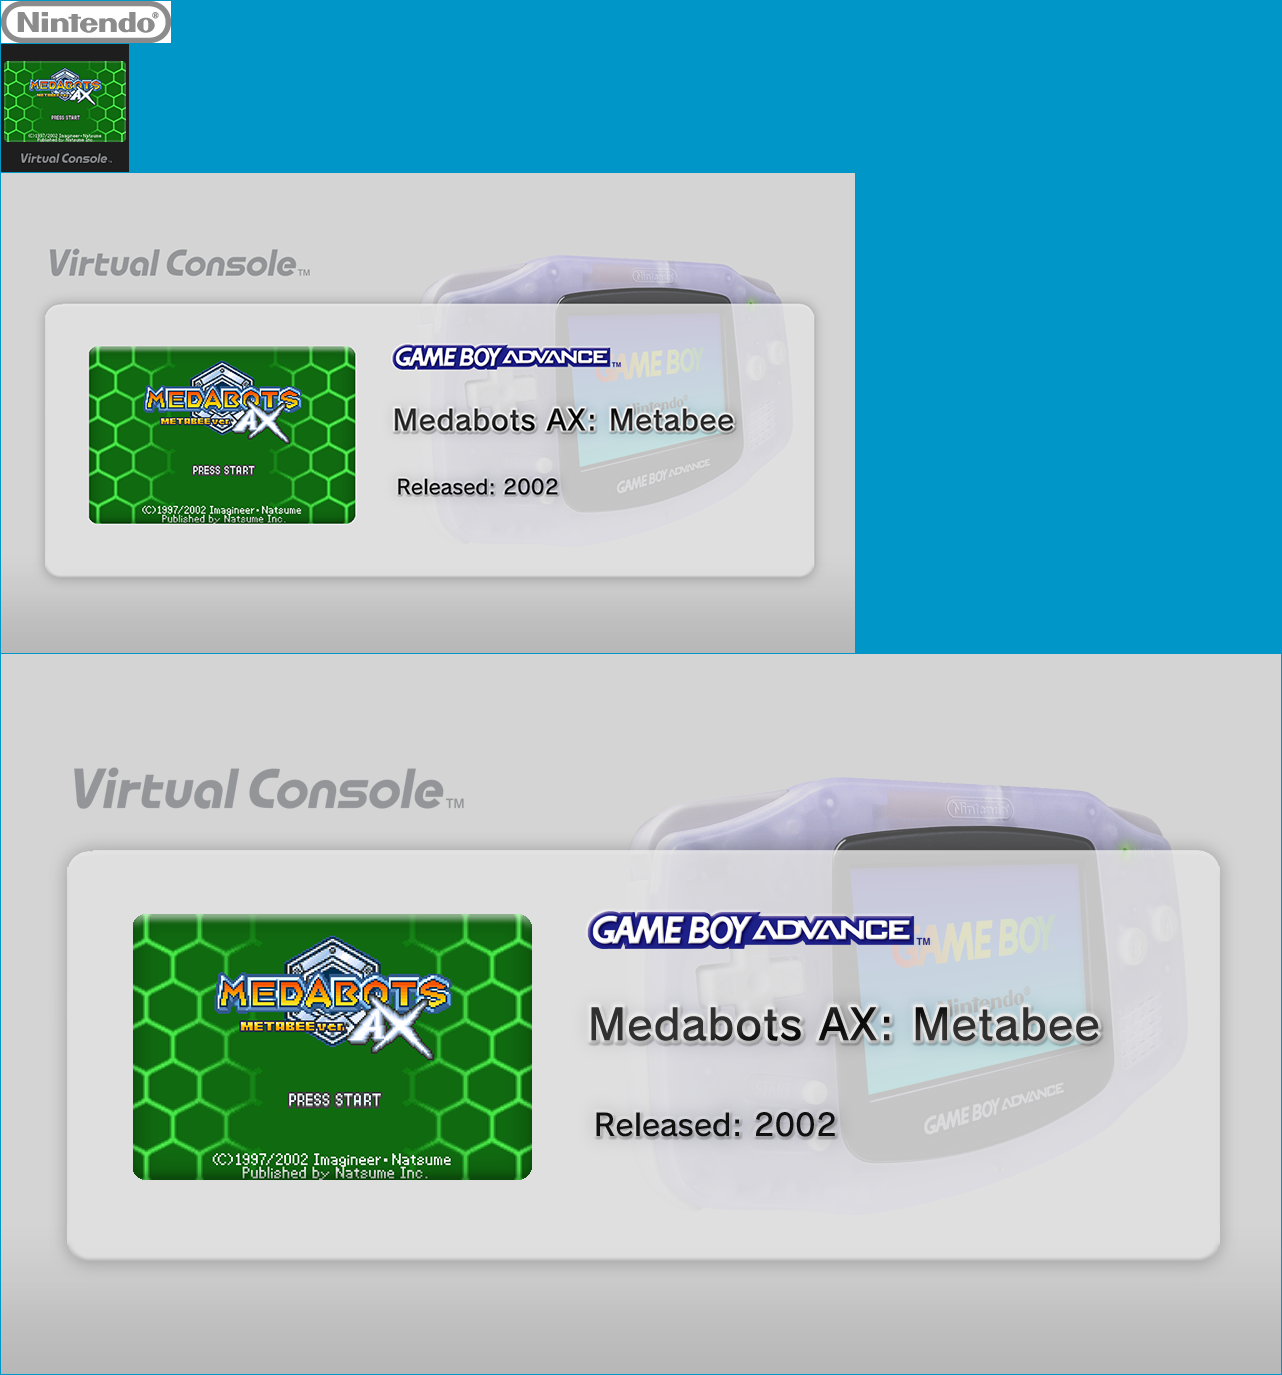 Virtual Console - Medabots AX: Metabee